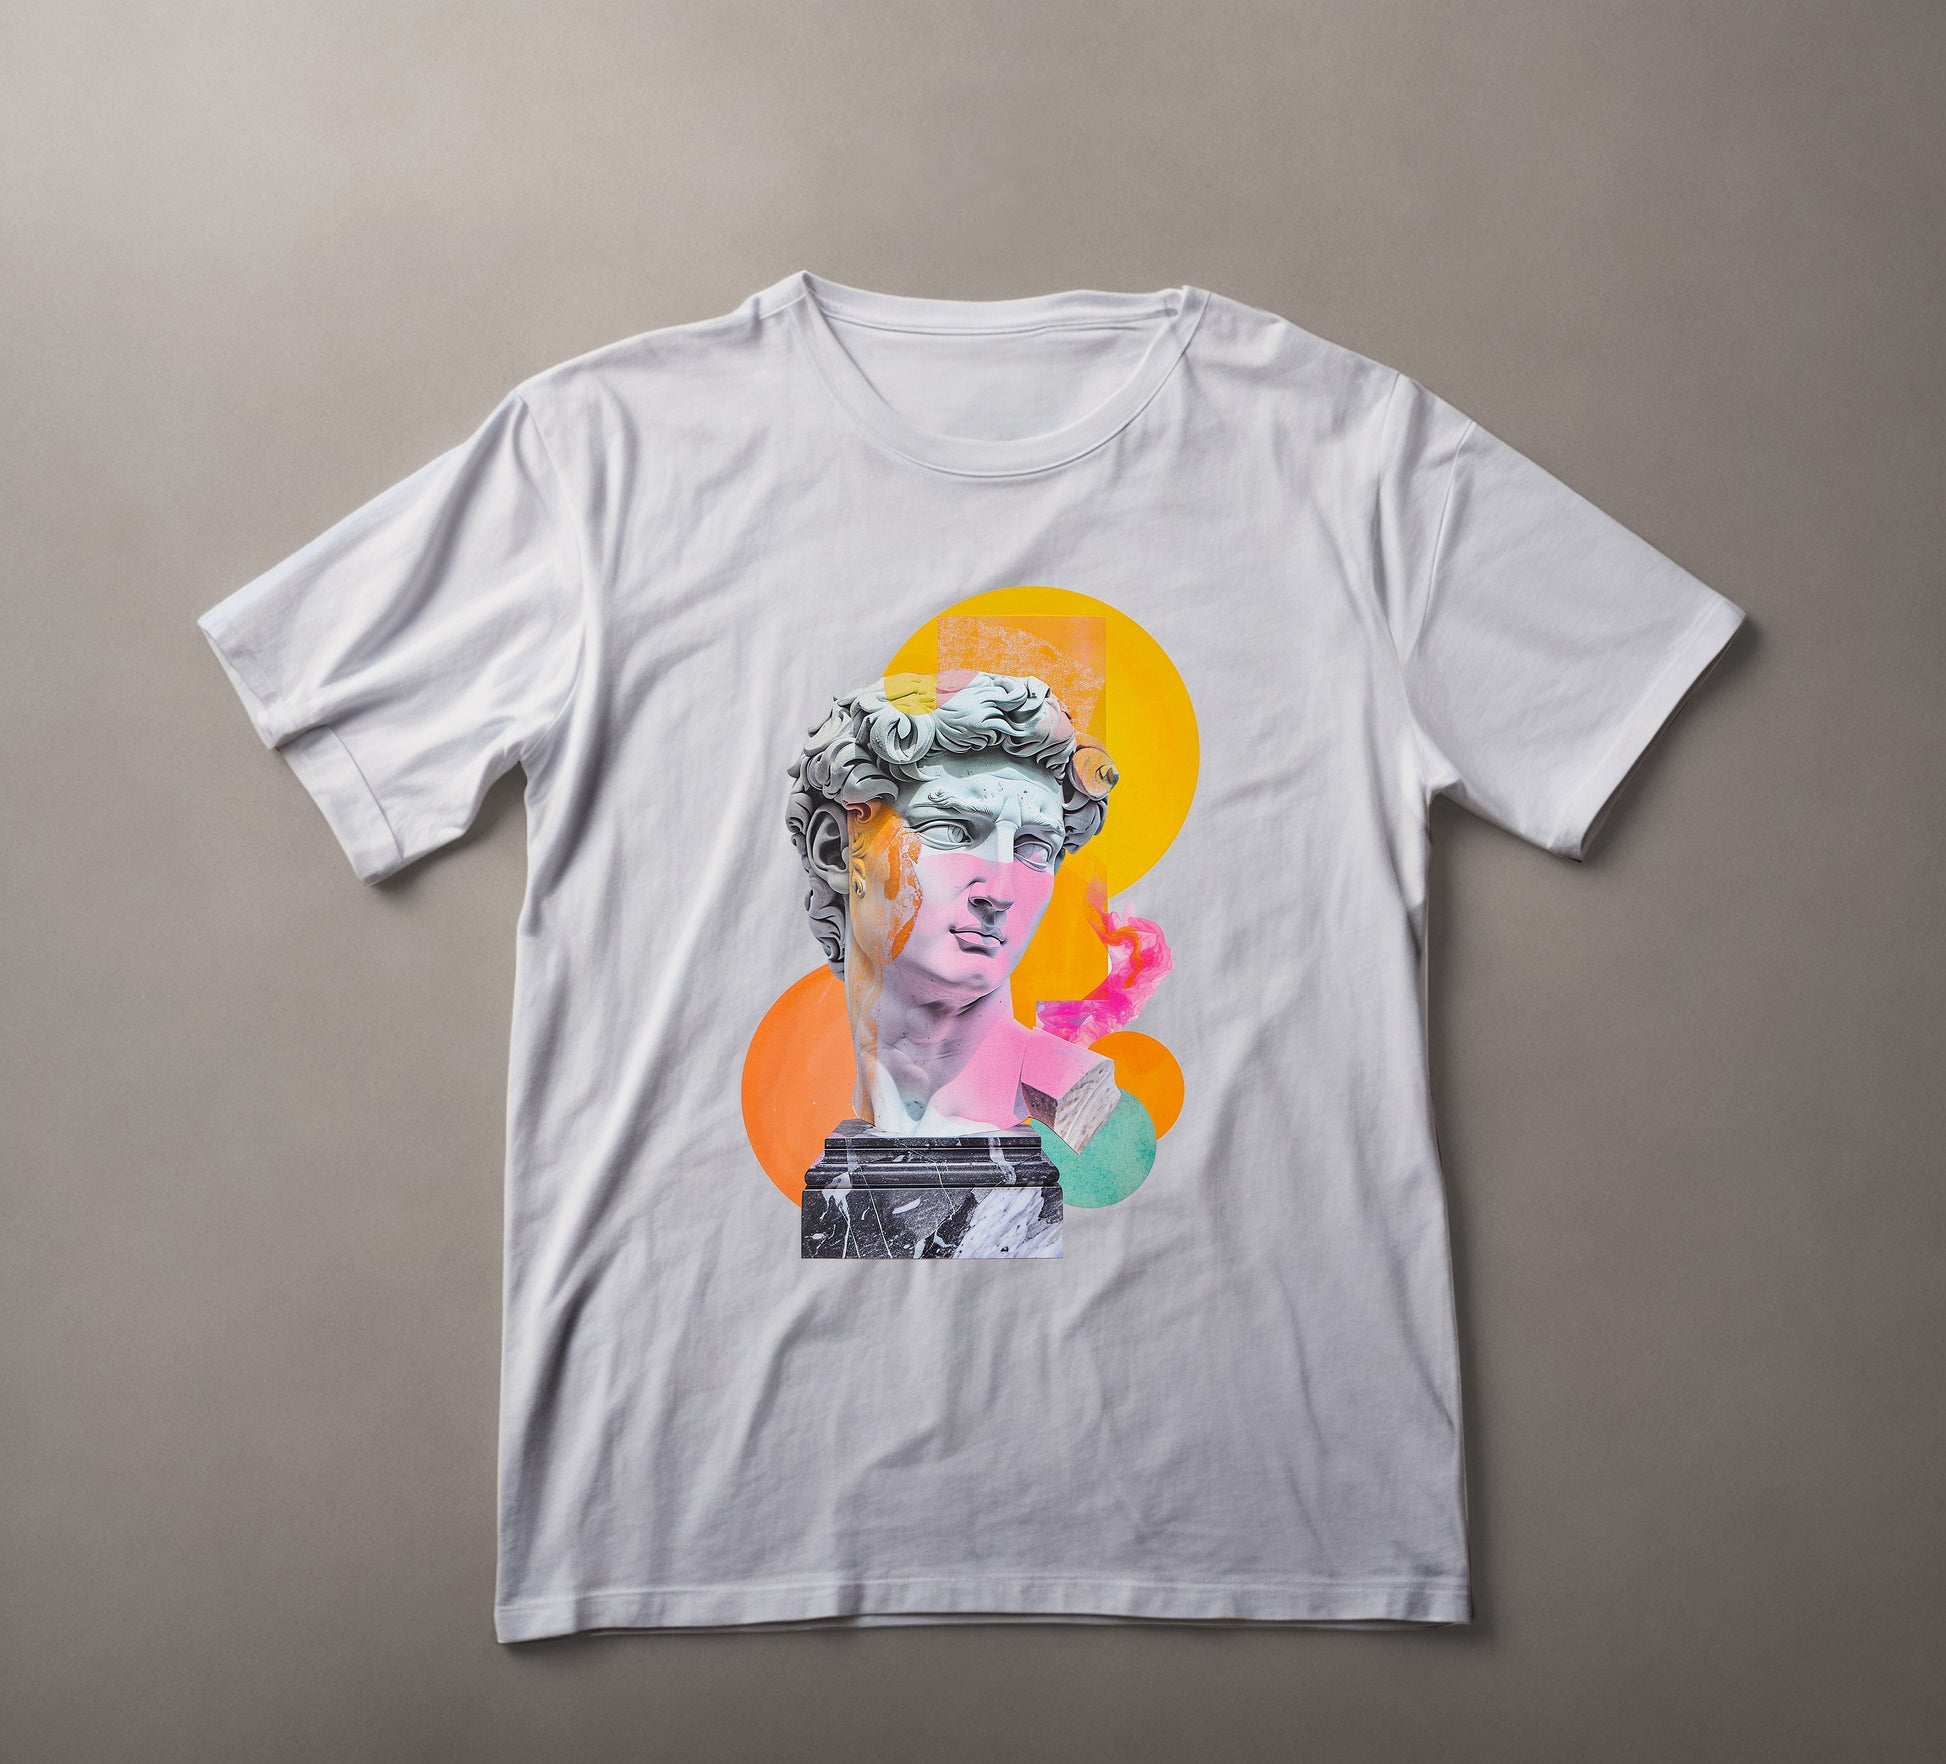 Classical bust with modern twist, abstract art tee, graffiti style, vibrant splashes, creative streetwear, pop culture blend, artistic fashion, contemporary design, urban chic, dynamic color palette